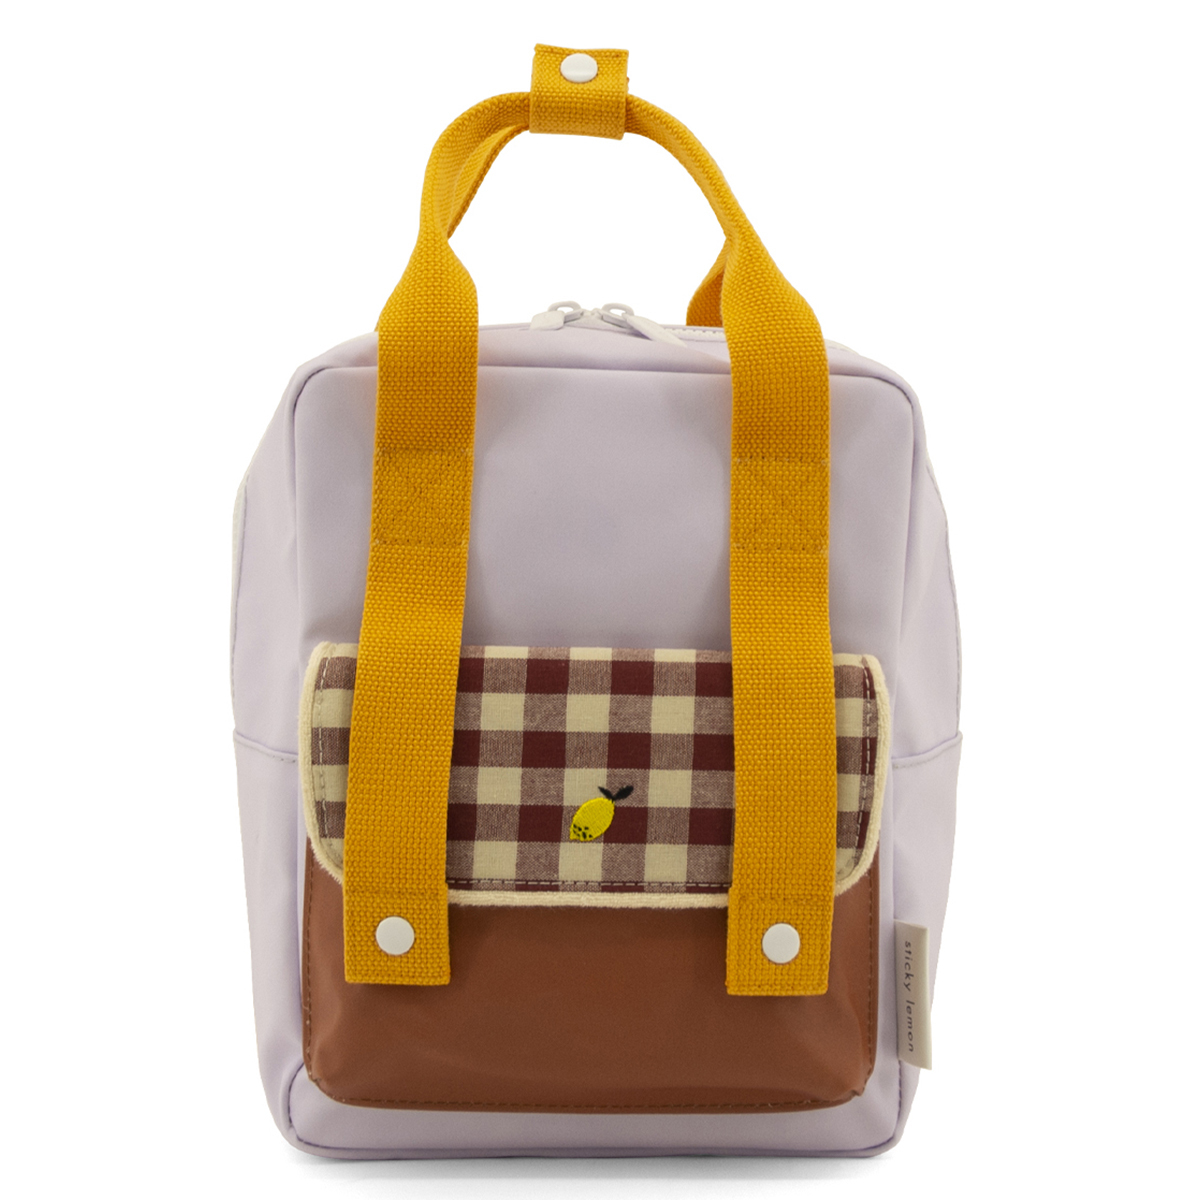 Bagagerie enfant Sac à Dos - Gingham Chocolate Sundae Sac à Dos - Gingham Chocolate Sundae